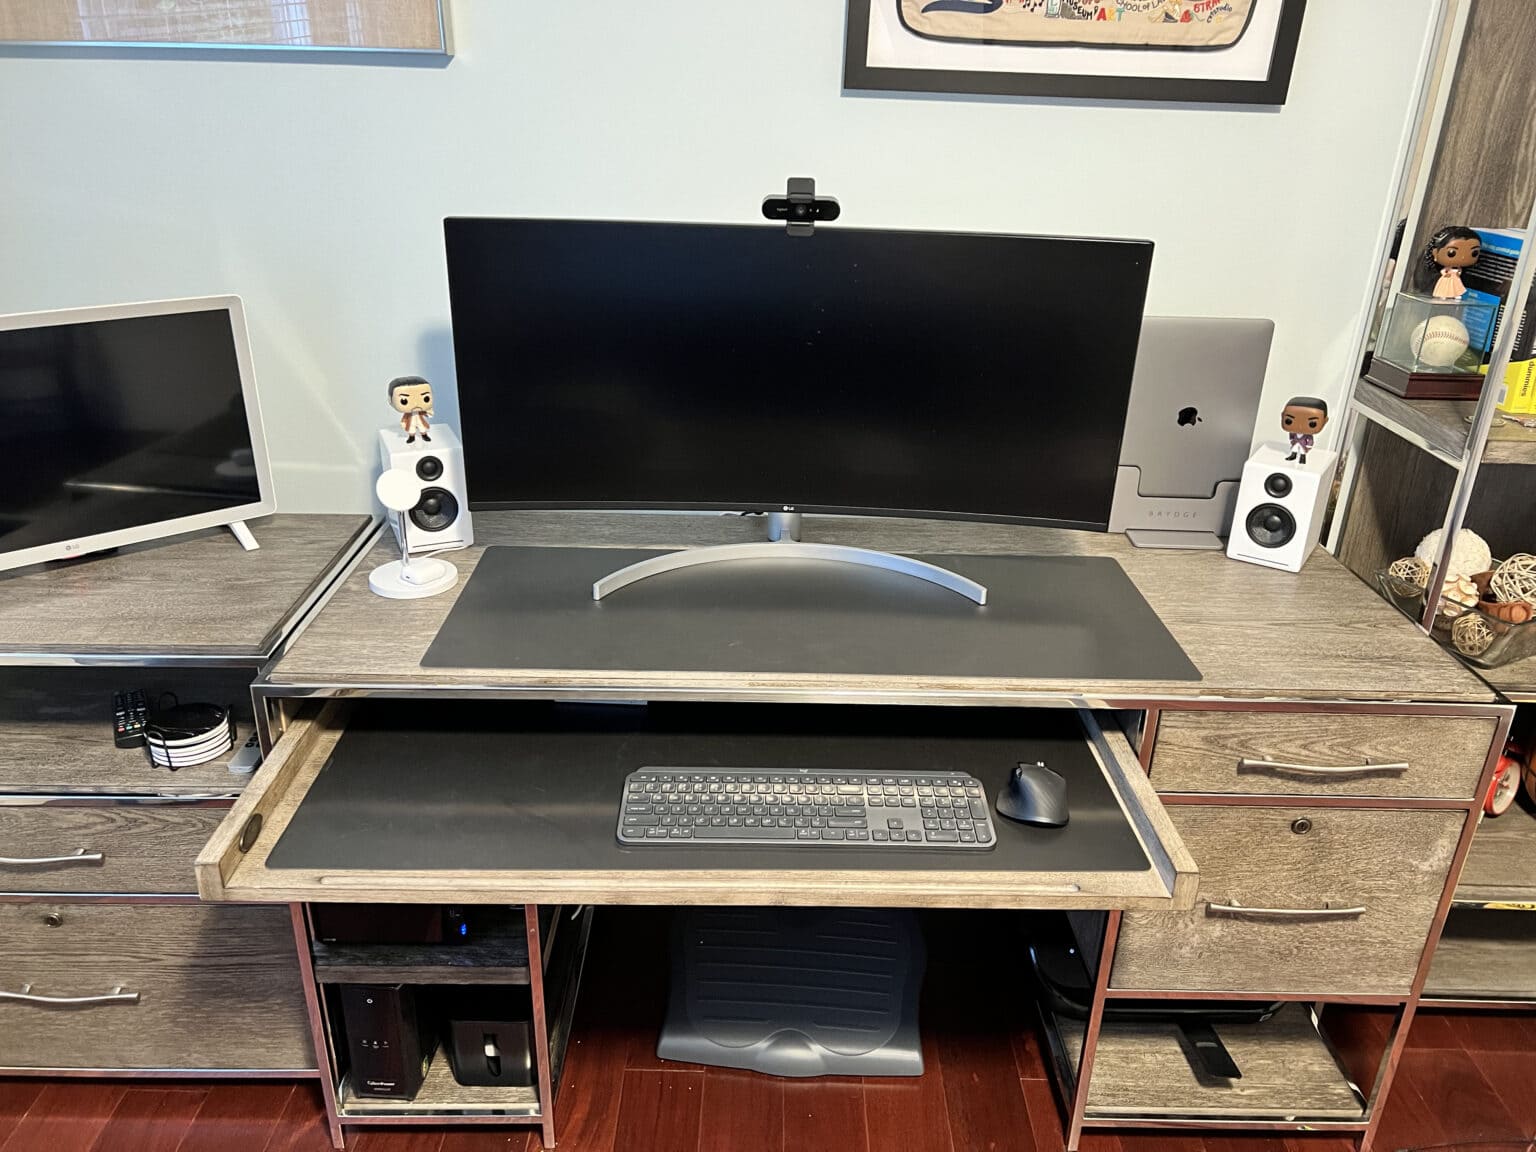 Marc Drucker's WFH setup saves some cable clutter by using the monitor as a USB hub.